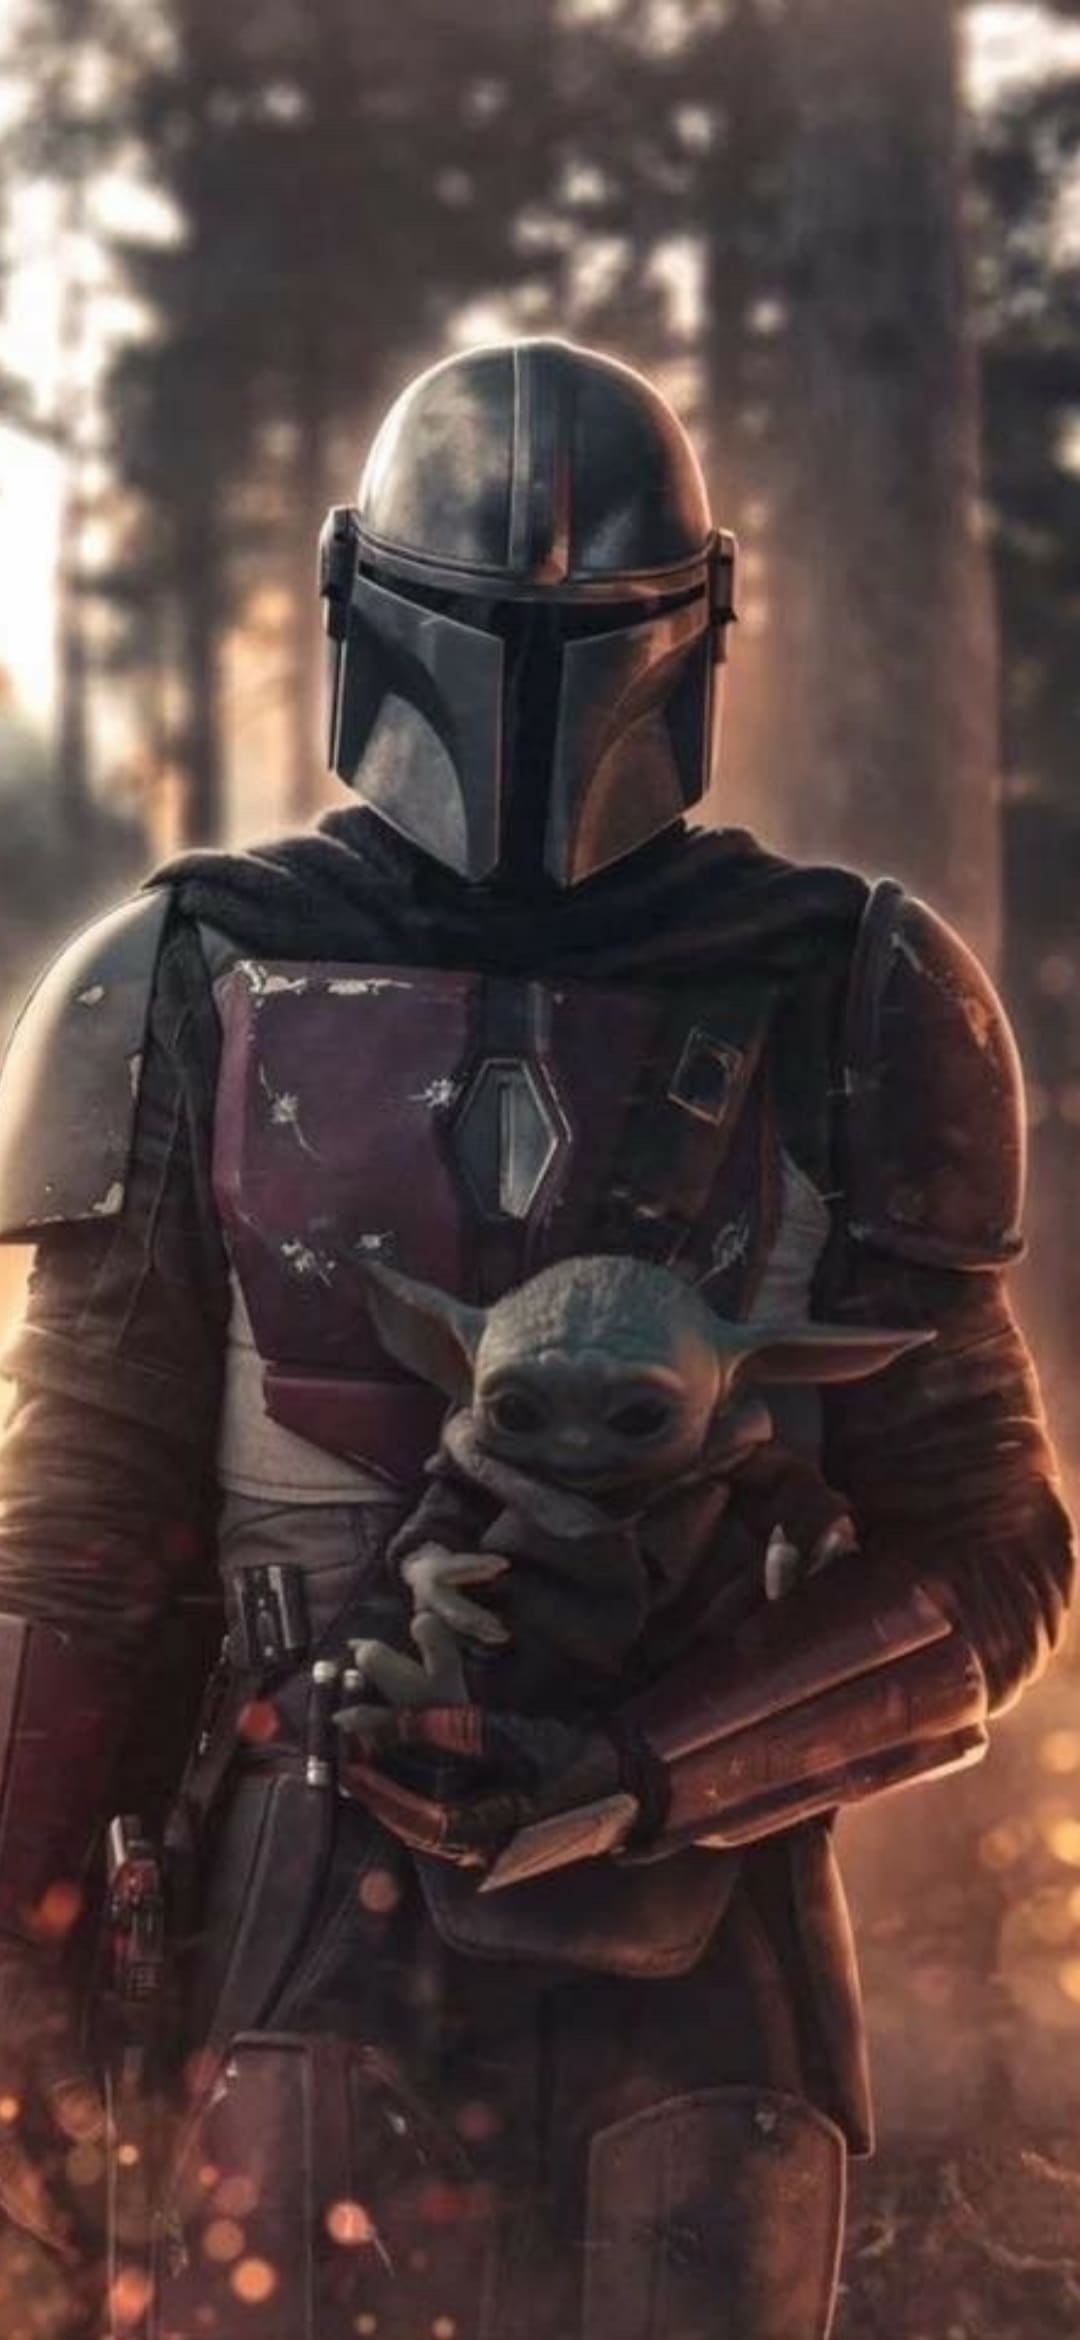 The Child And Mandalorian In Season 2 Wallpapers